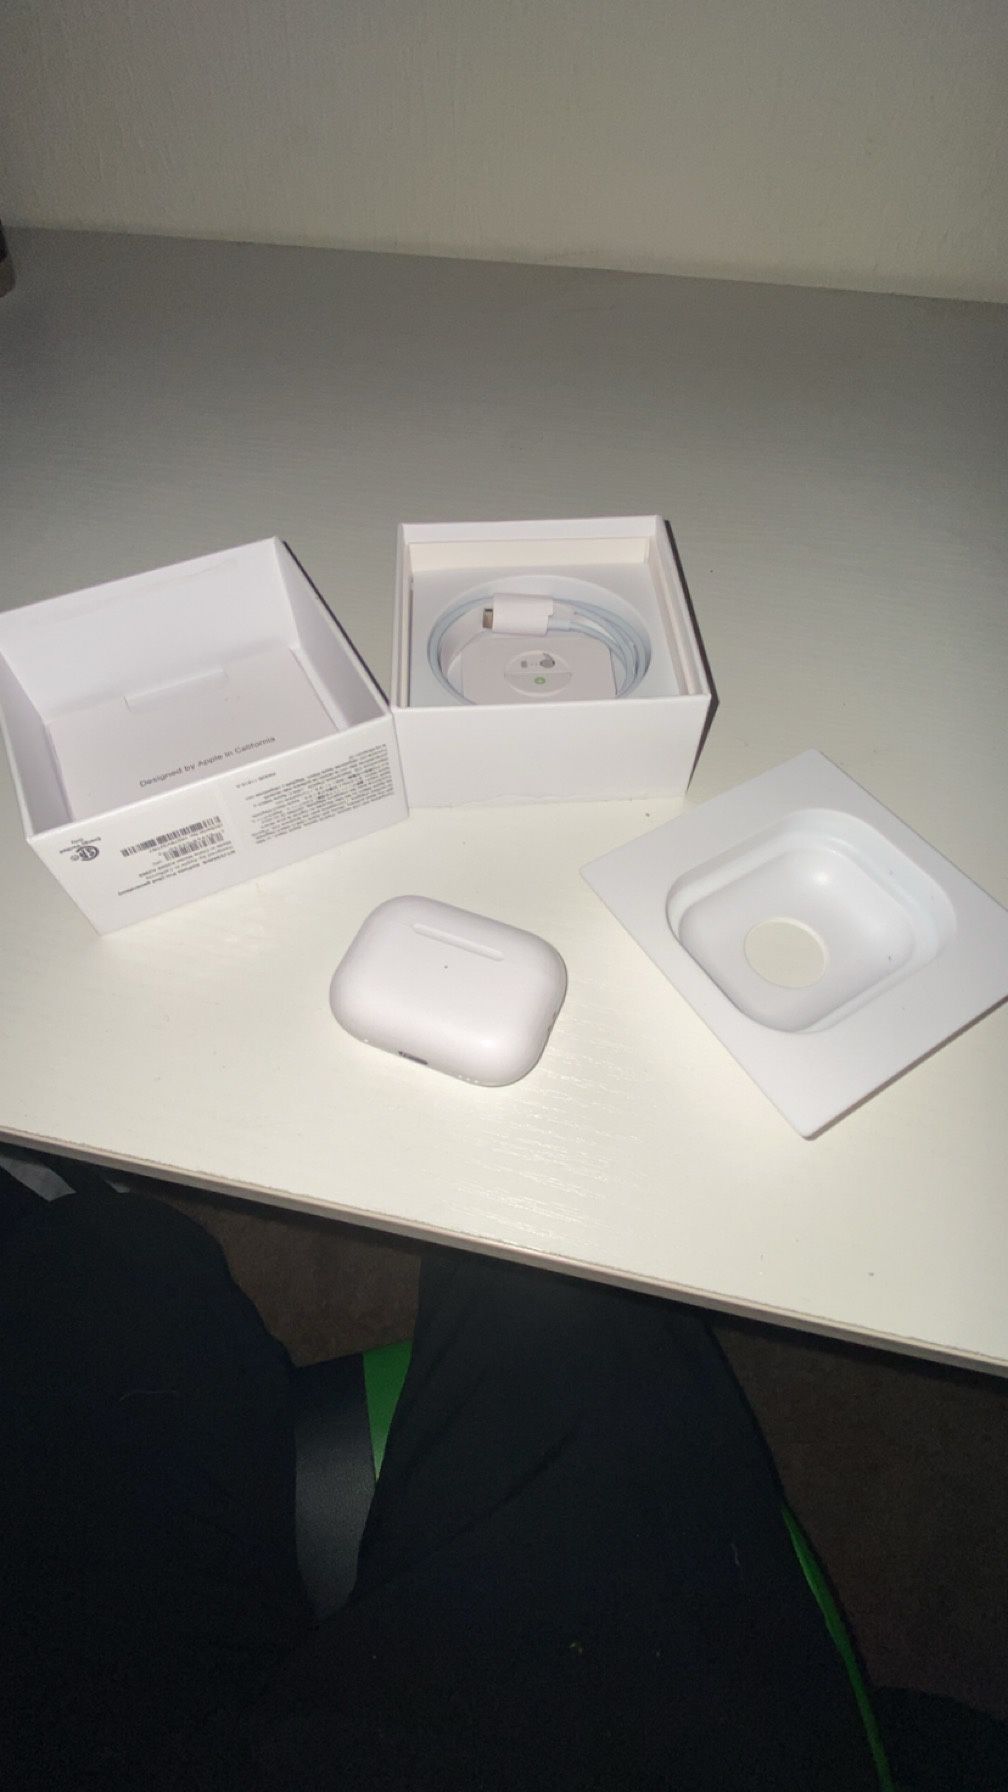 Airpod Pro 2nd Generation (NEVER USED)